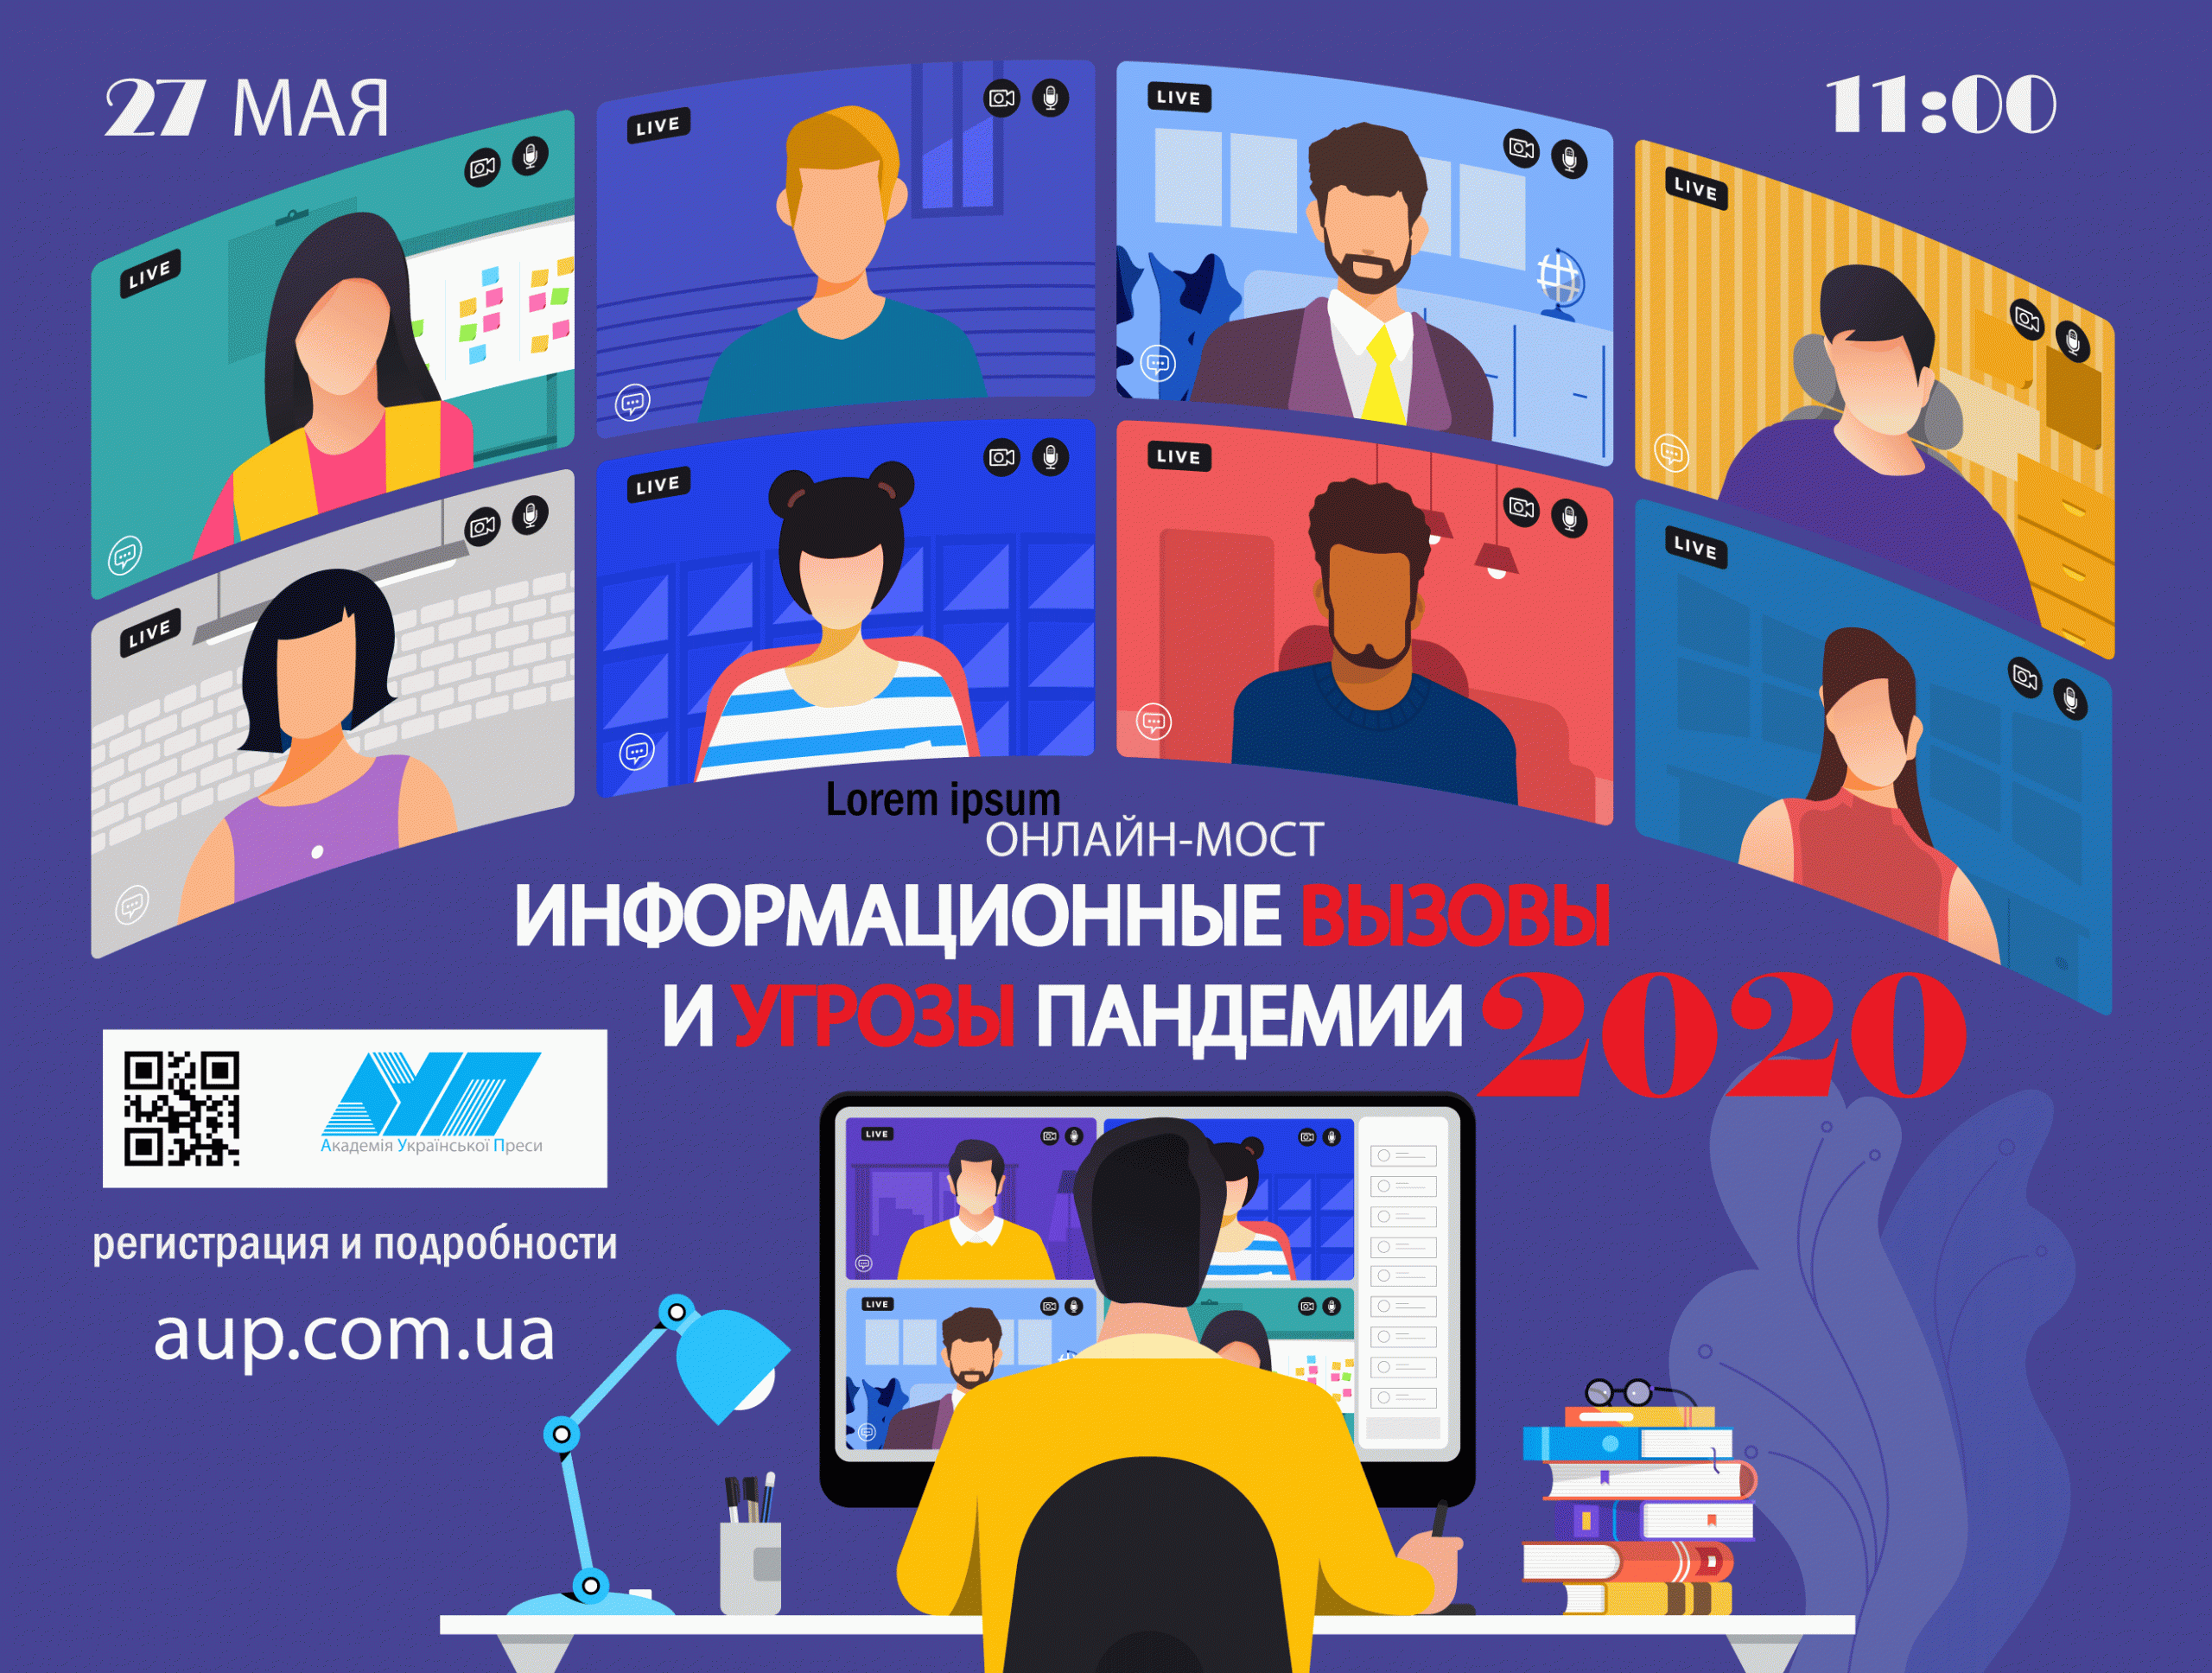 Web-forum “Information Challenges and Pandemic Threat 2020”